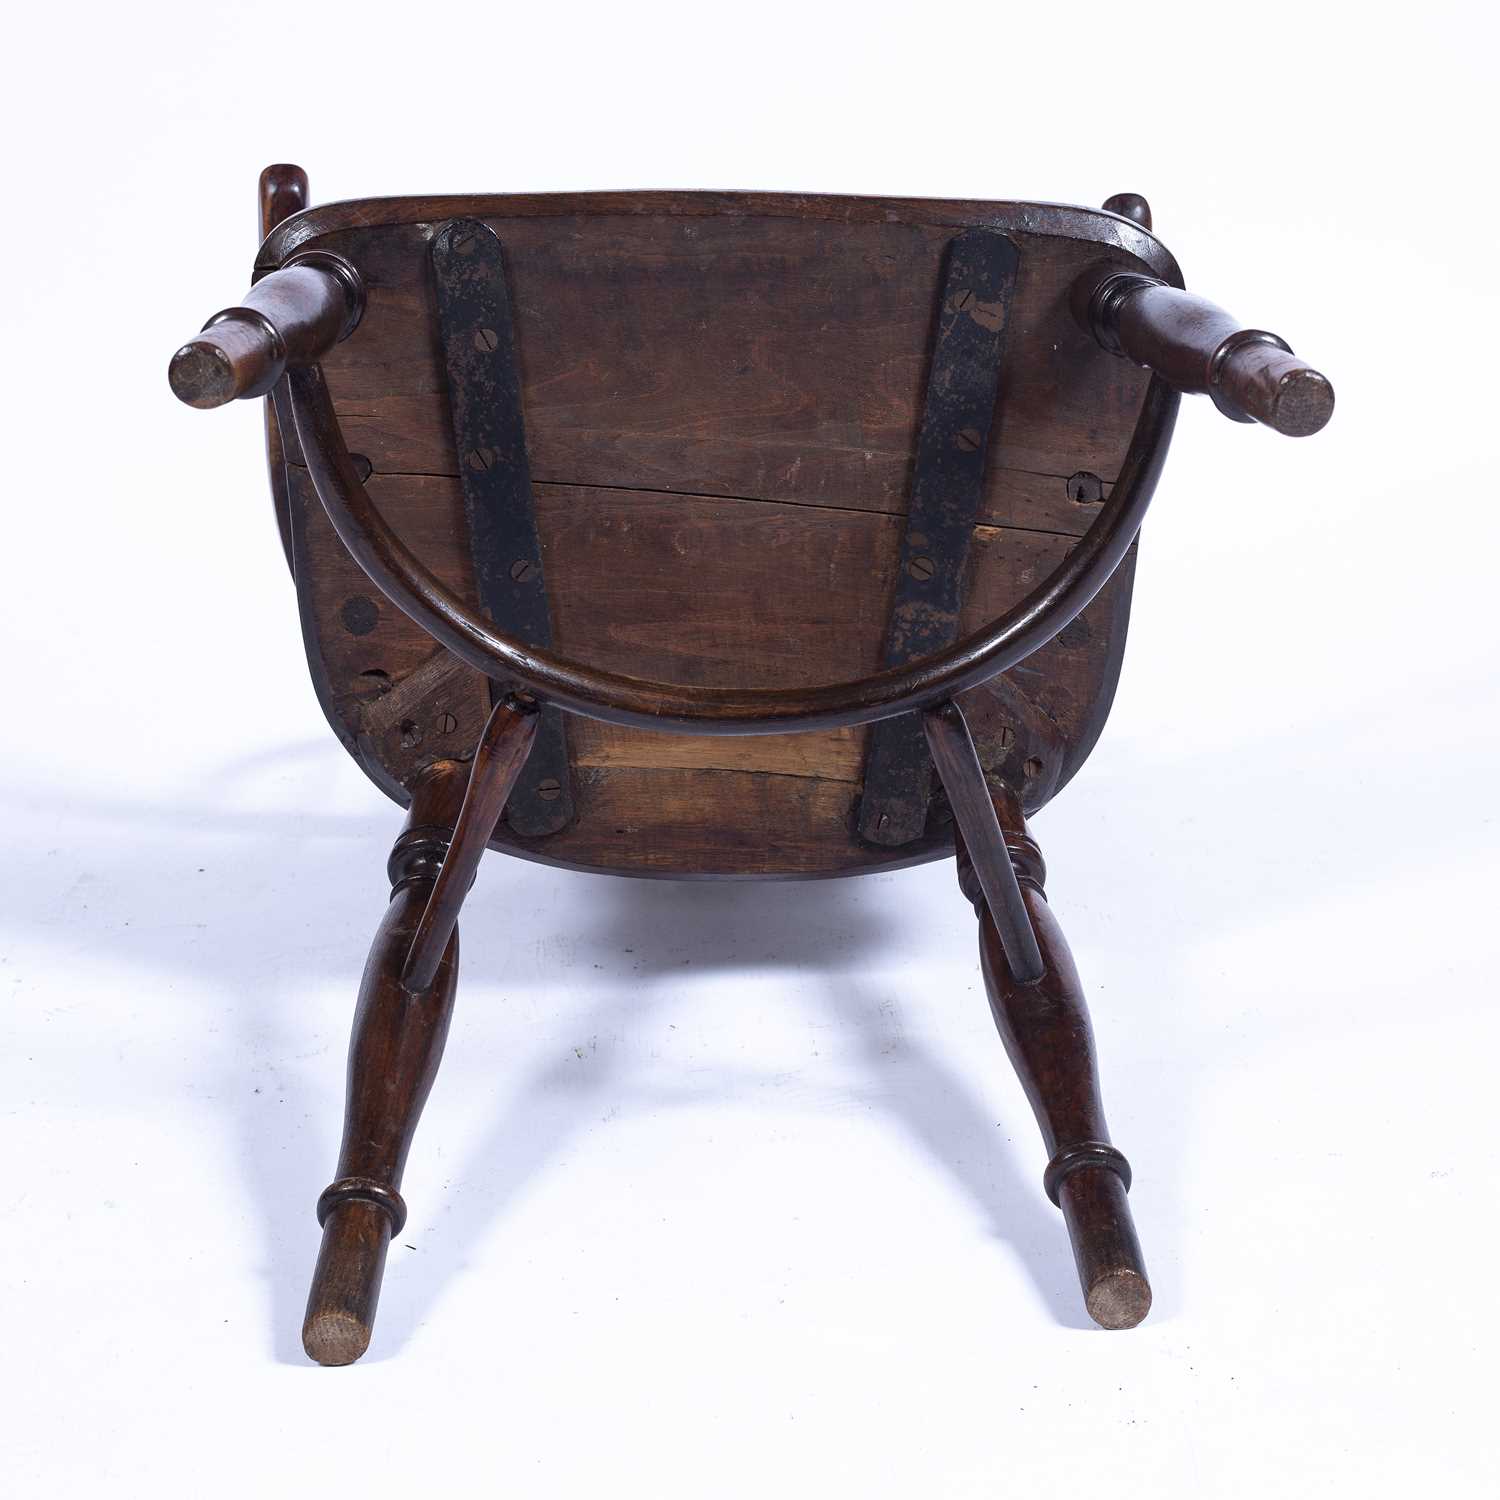 William Wheatland at Rockley Yew wood Windsor chair, with pierced splat, and crinoline stretcher, - Image 4 of 5